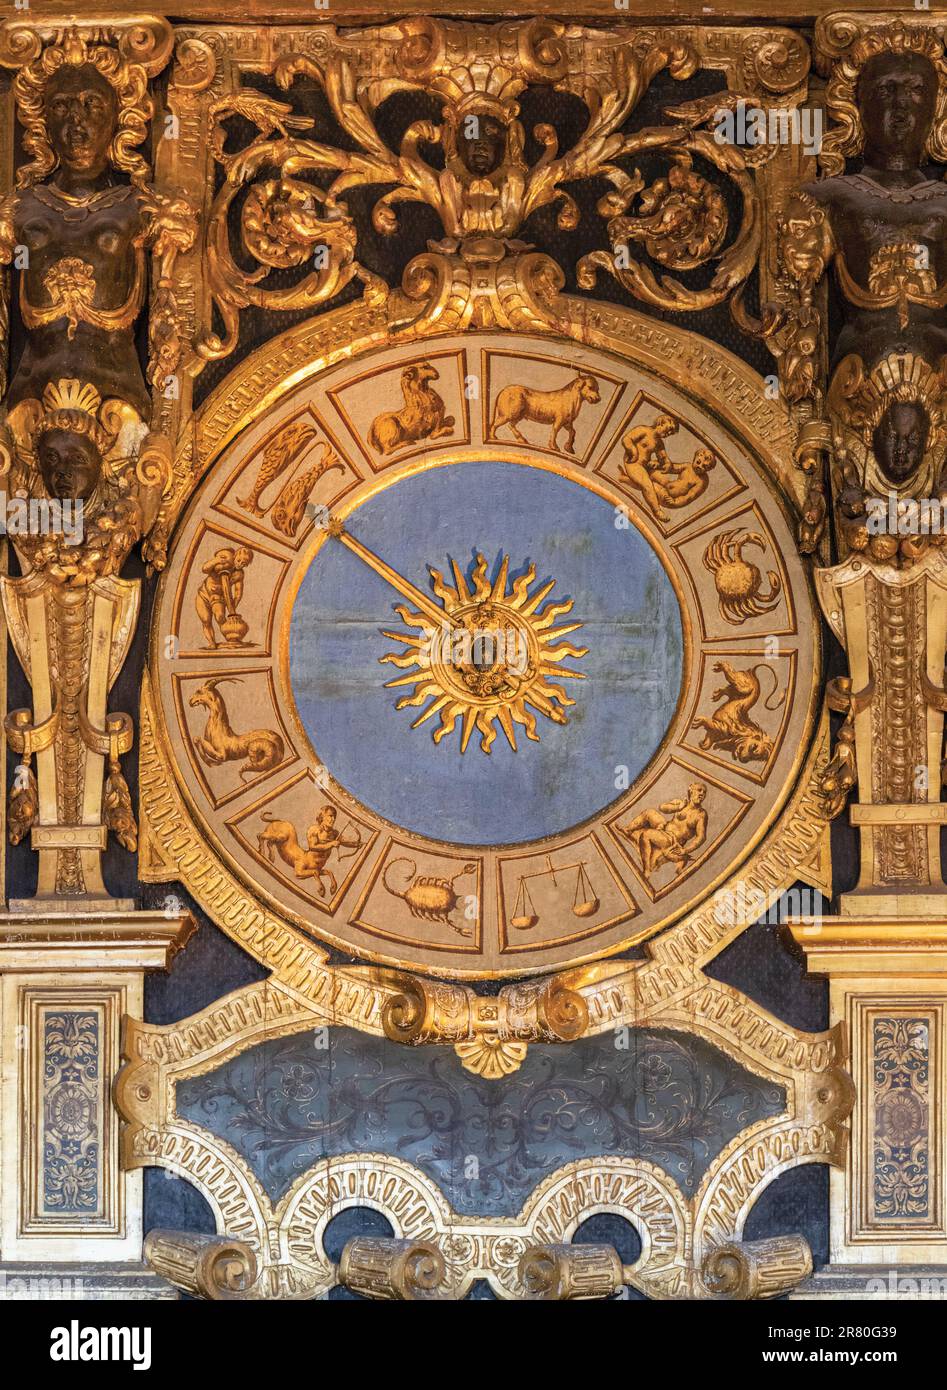 Detail of astrological clock with the twelve signs of the zodiac in the Senate Chamber or Sala del Senato in the Doge's Palace, or Palazzo Ducale.  Ve Stock Photo